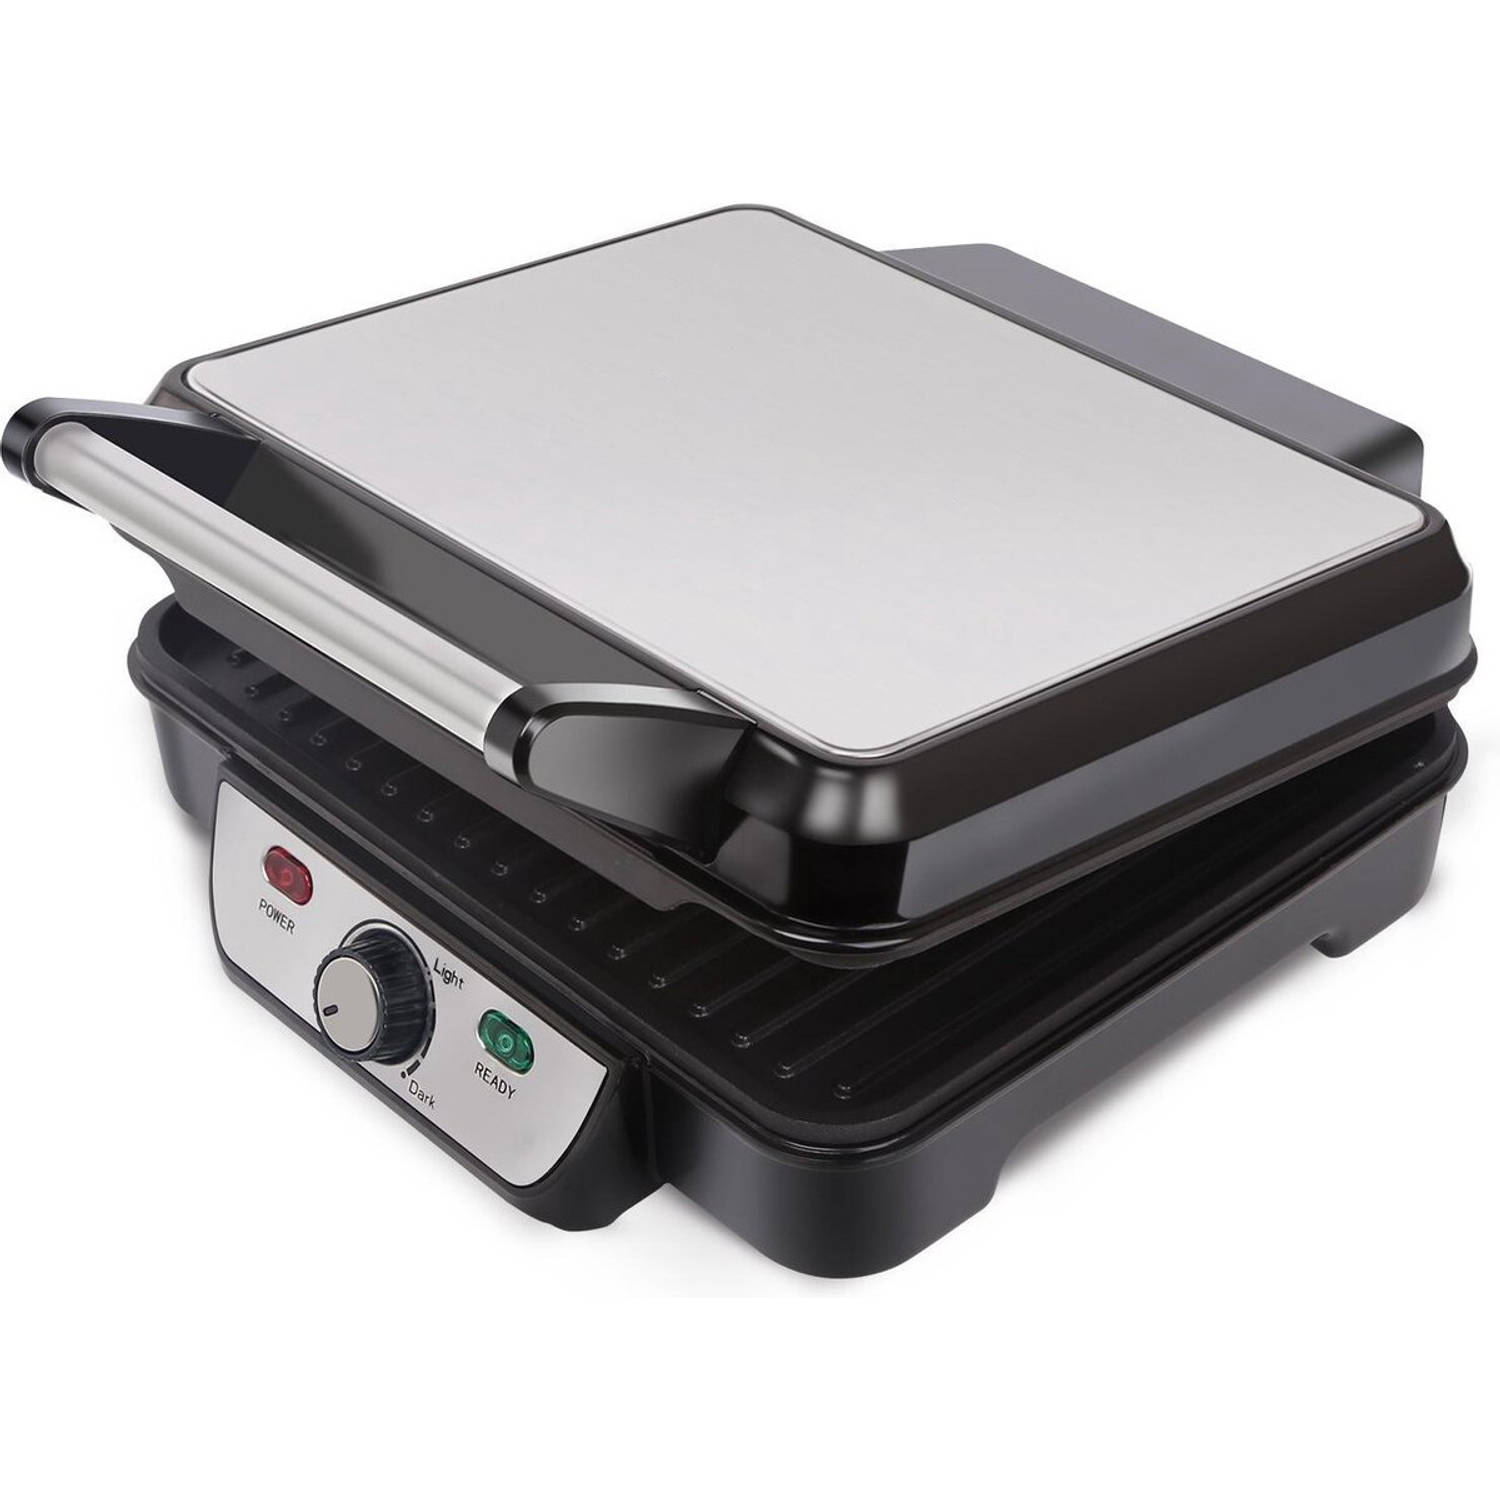 Contactgrill - Tosti Apparaat - Tosti Ijzer - Aigi Cale - Cool Touch - RVS - Zwart/Zilver